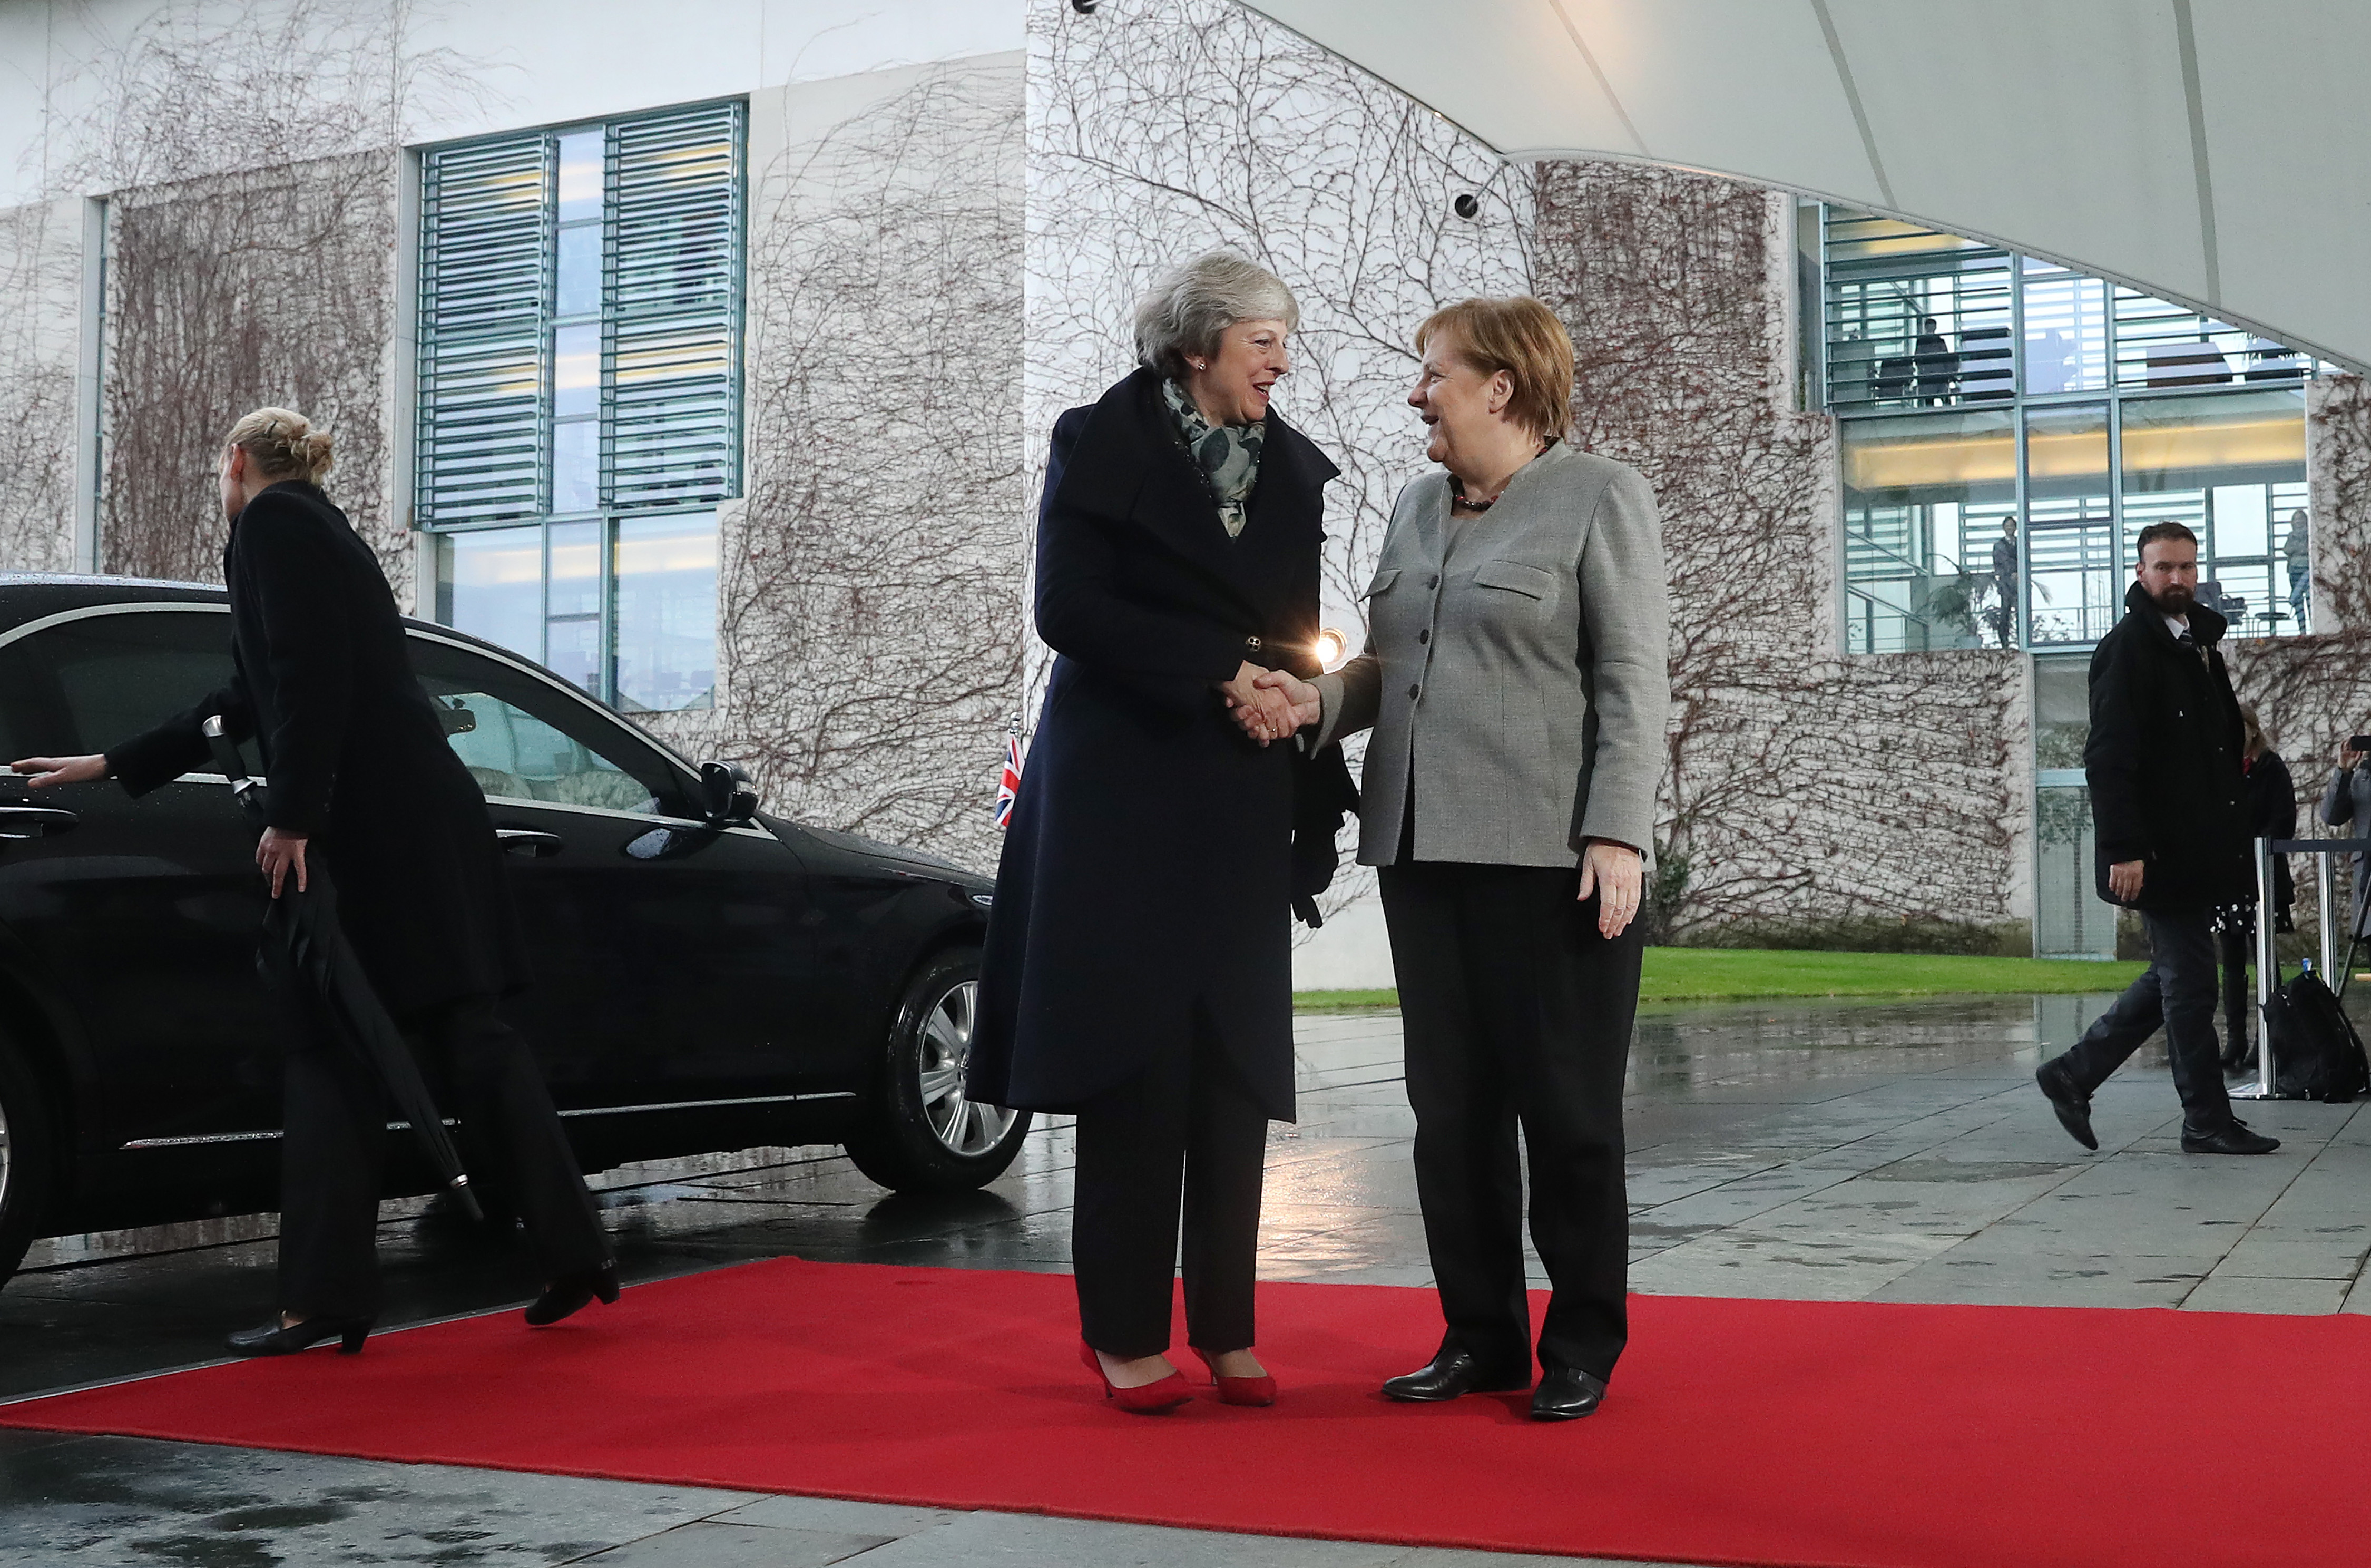 BERLIN, GERMANY - DECEMBER 11: German Chancellor Angela Merkel greets British Prime Minister Theresa May upon May's arrival for talks at the Chancellery on December 11, 2018 in Berlin, Germany. May is meeting Merkel ahead of Thursday's EU Council meeting in Brussels and following May's recent postponement of a vote over her Brexit plan in the British Parliament. May postponed the vote when it became clear she would lose. She is now seeking to wring out extra concessions from EU leaders in order to gain the necessary votes she still needs. (Photo by Sean Gallup/Getty Images)